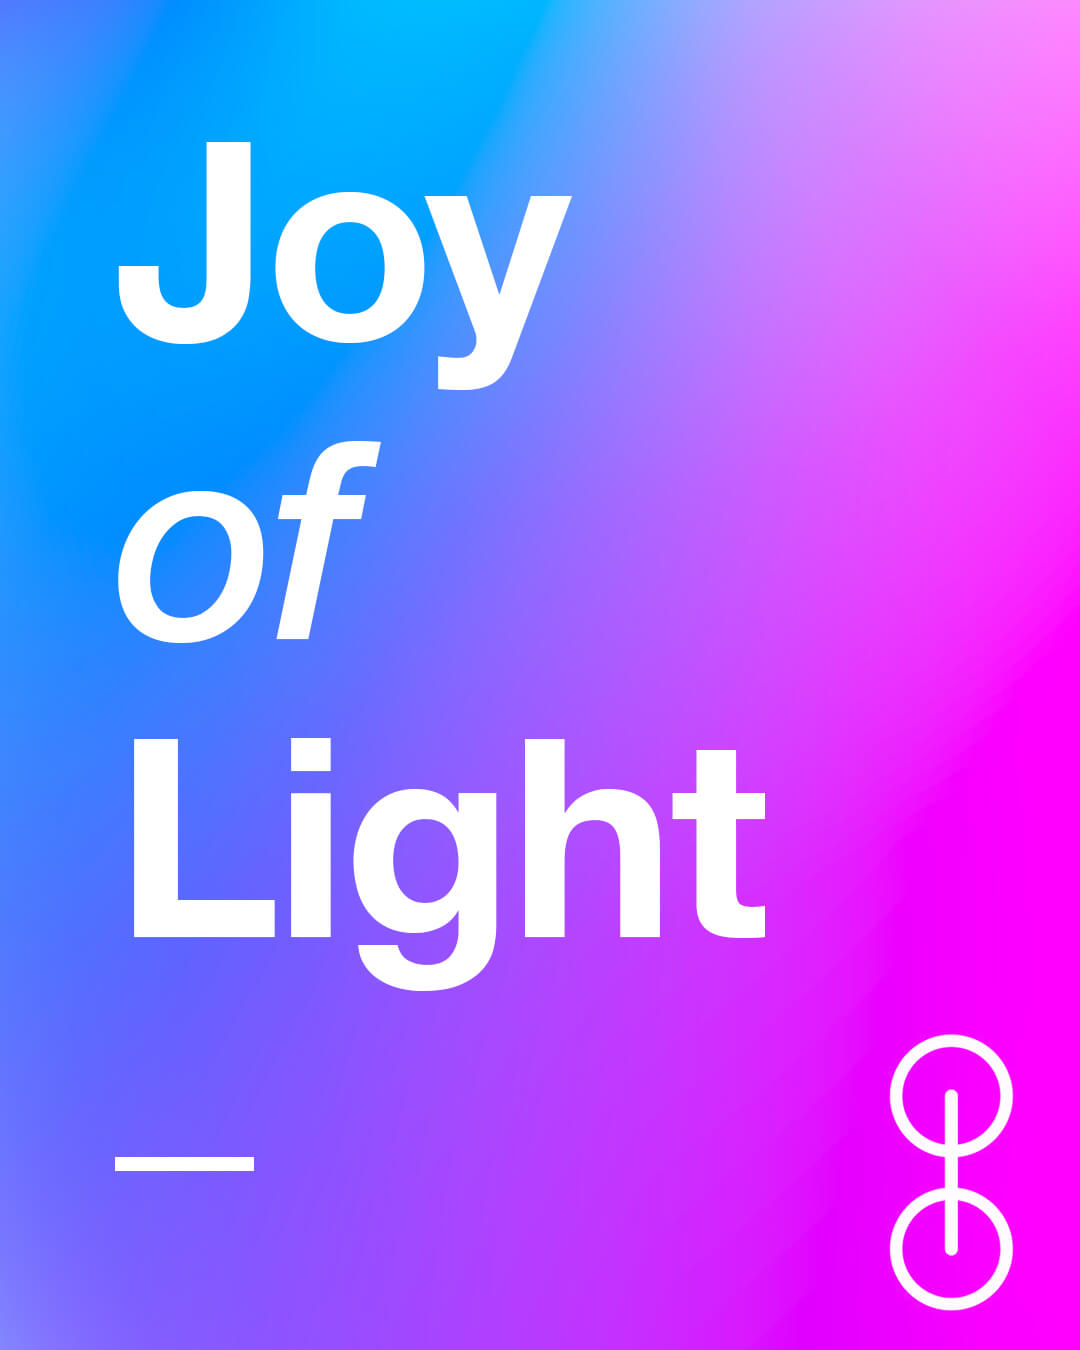 Joy of Light Experiential Campaign